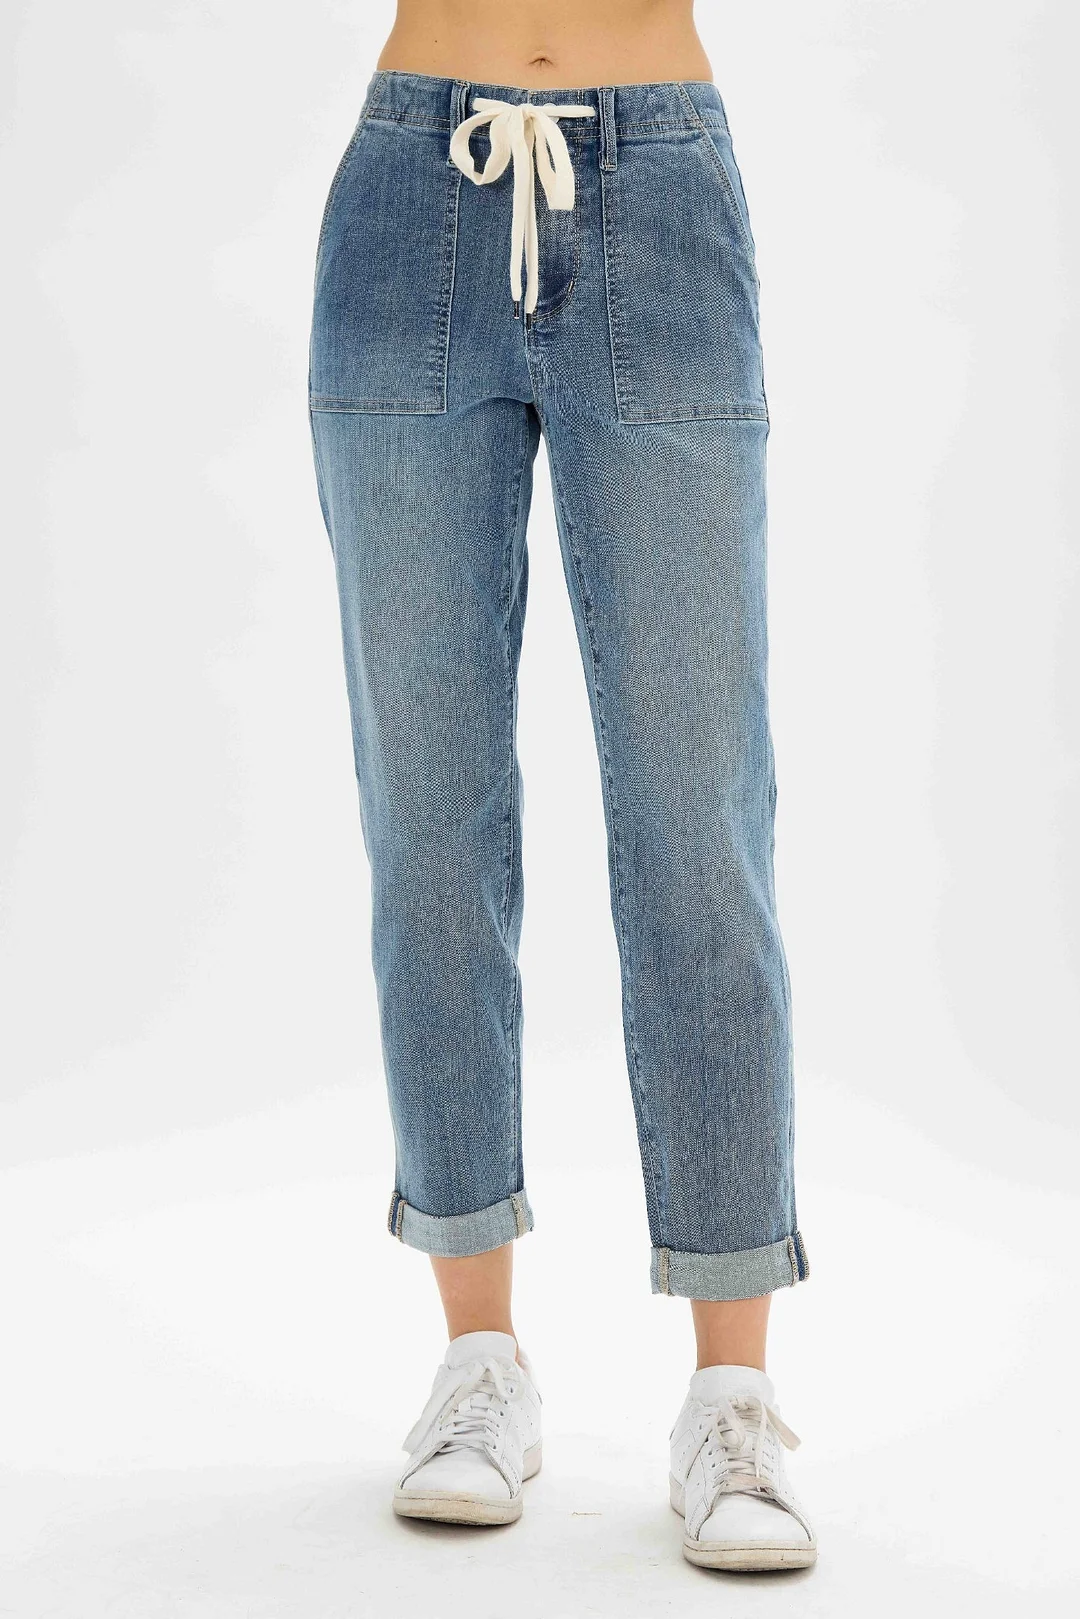 Judy Blue Pull On Denim Joggers (Buy 2 Free Shipping)